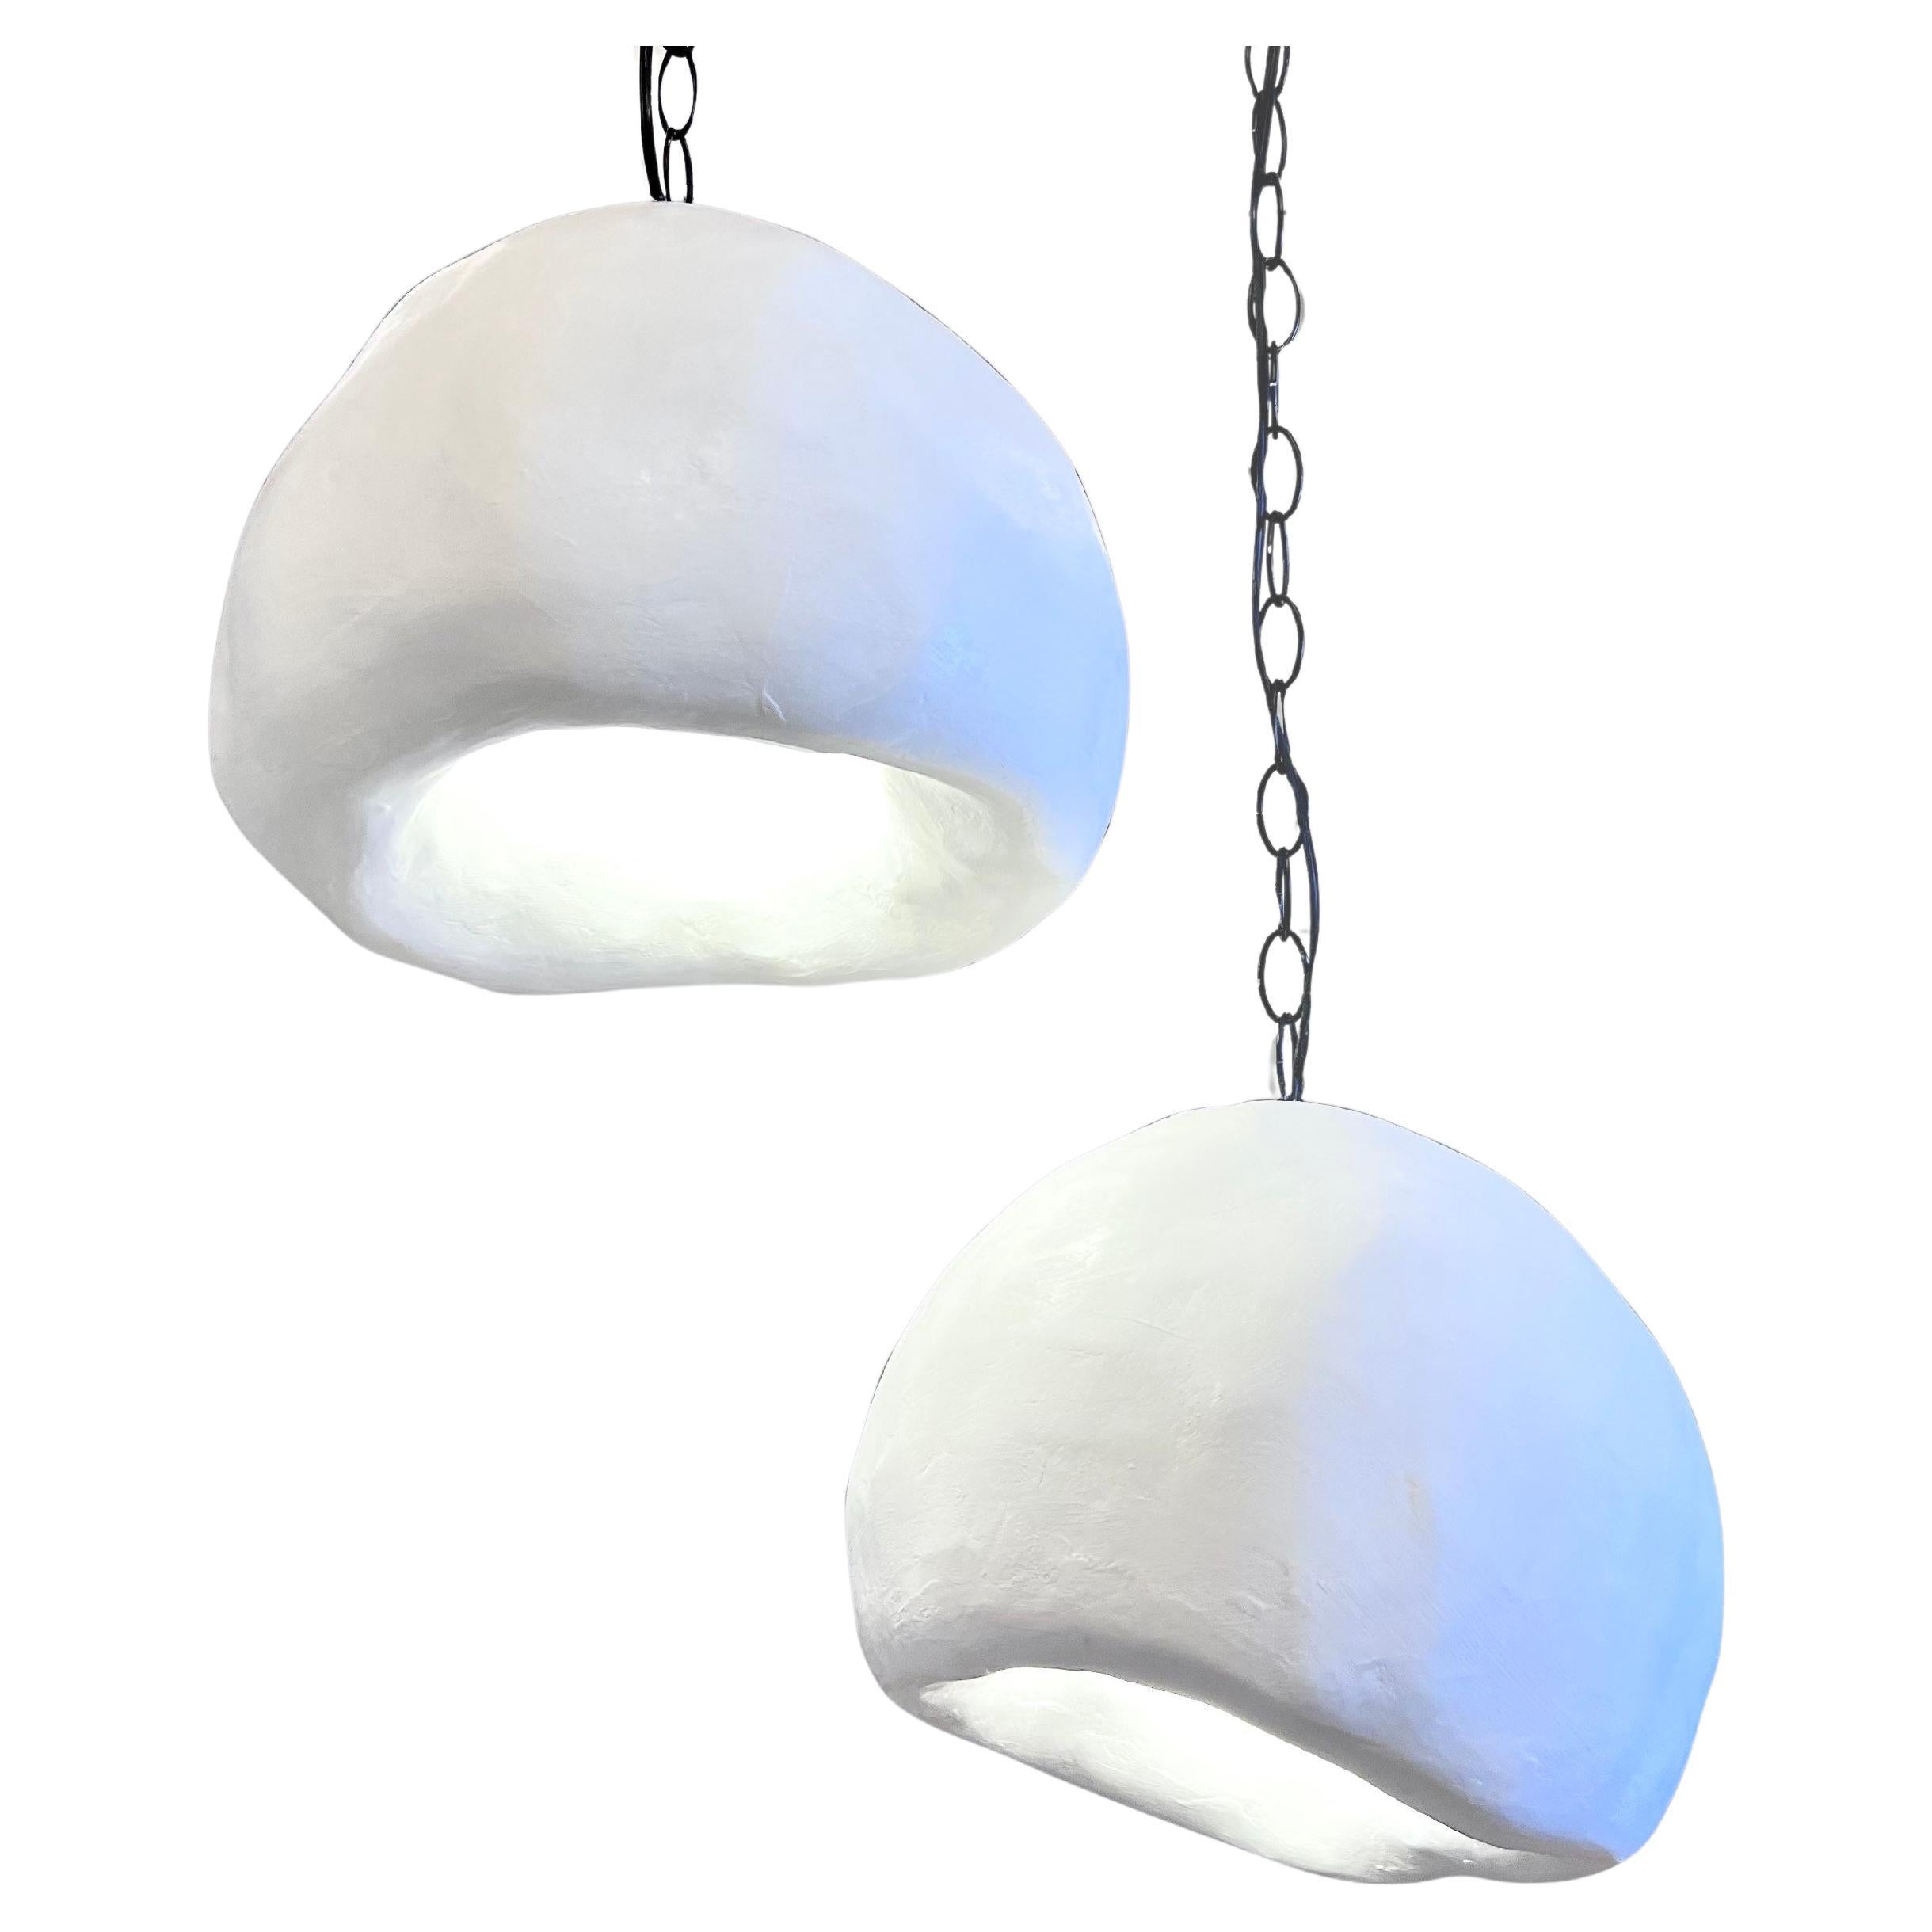 Biomorphic Suspension by Studio Chora, Organic Hanging Light Fixture, Made-to-order